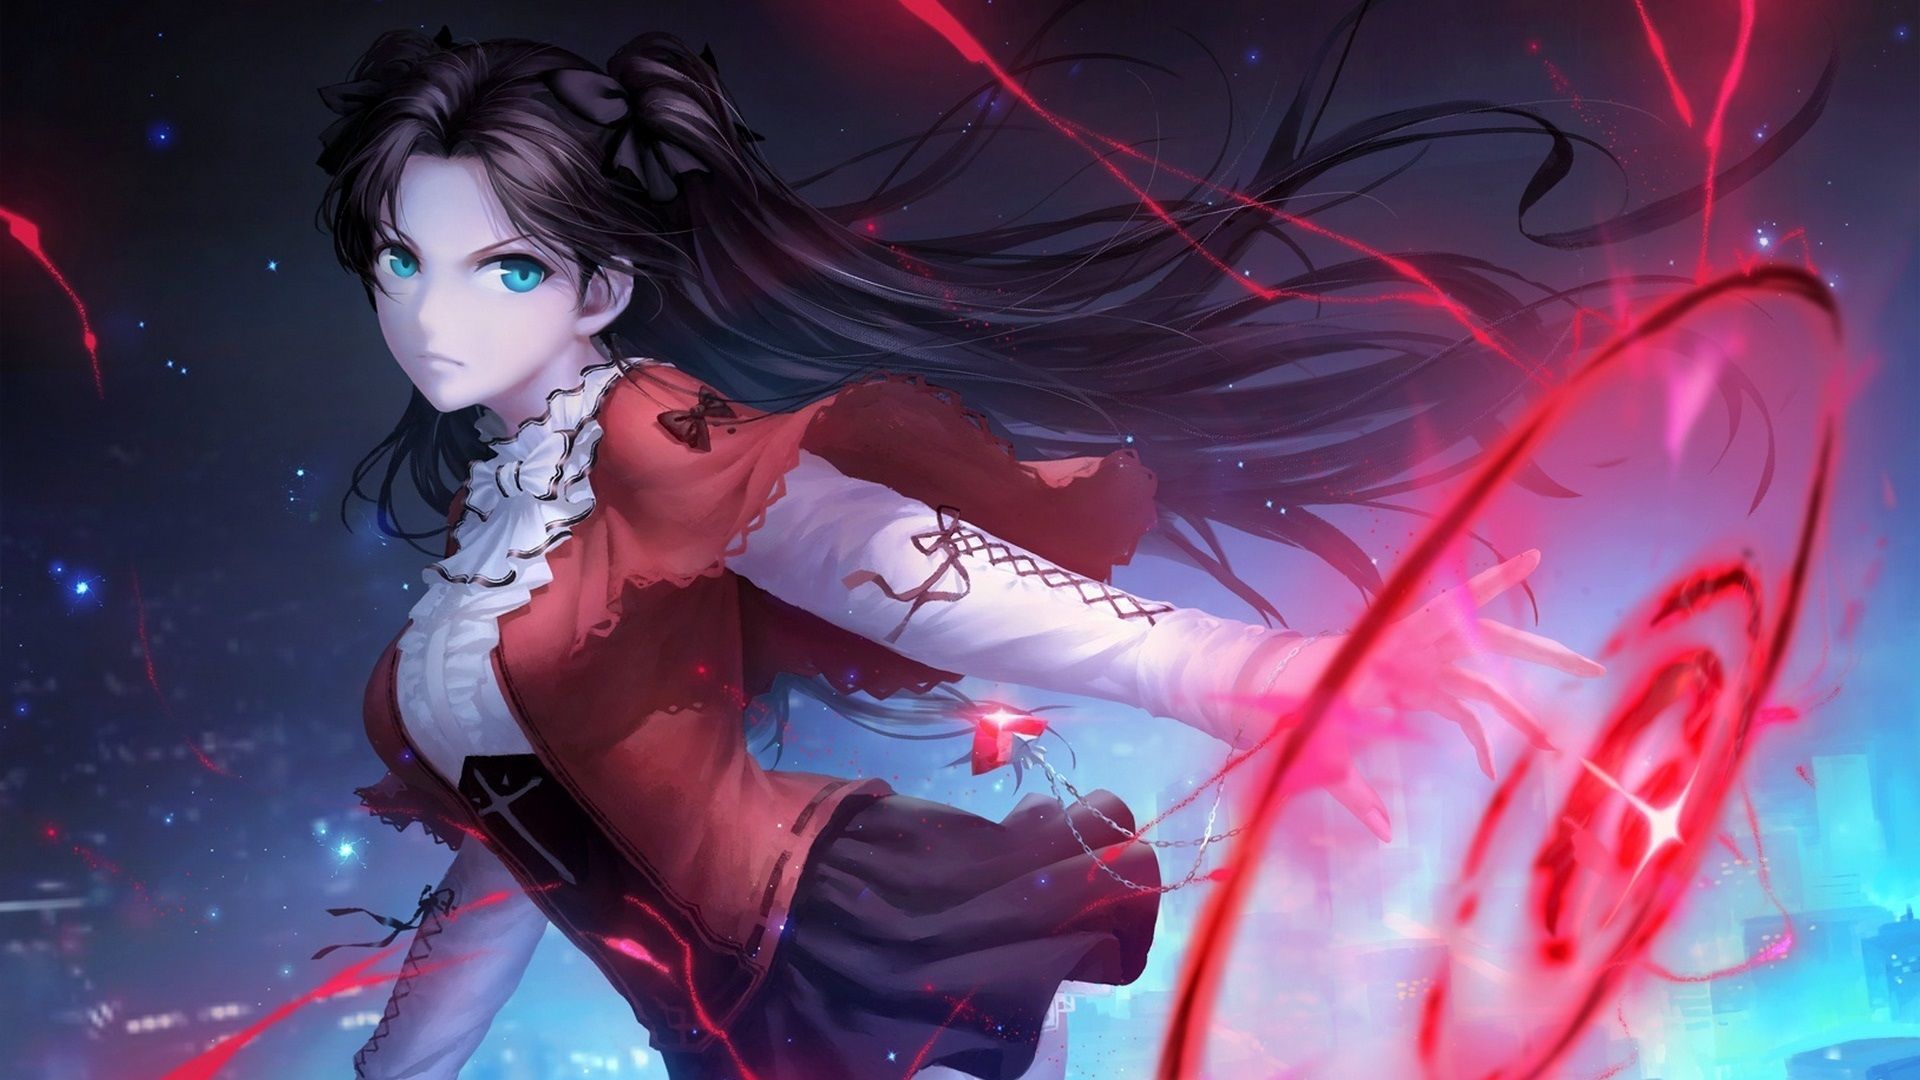 Wallpaper Fate Stay Night, blue eyes anime girl, magic 1920x1080 Full HD 2K Picture, Image